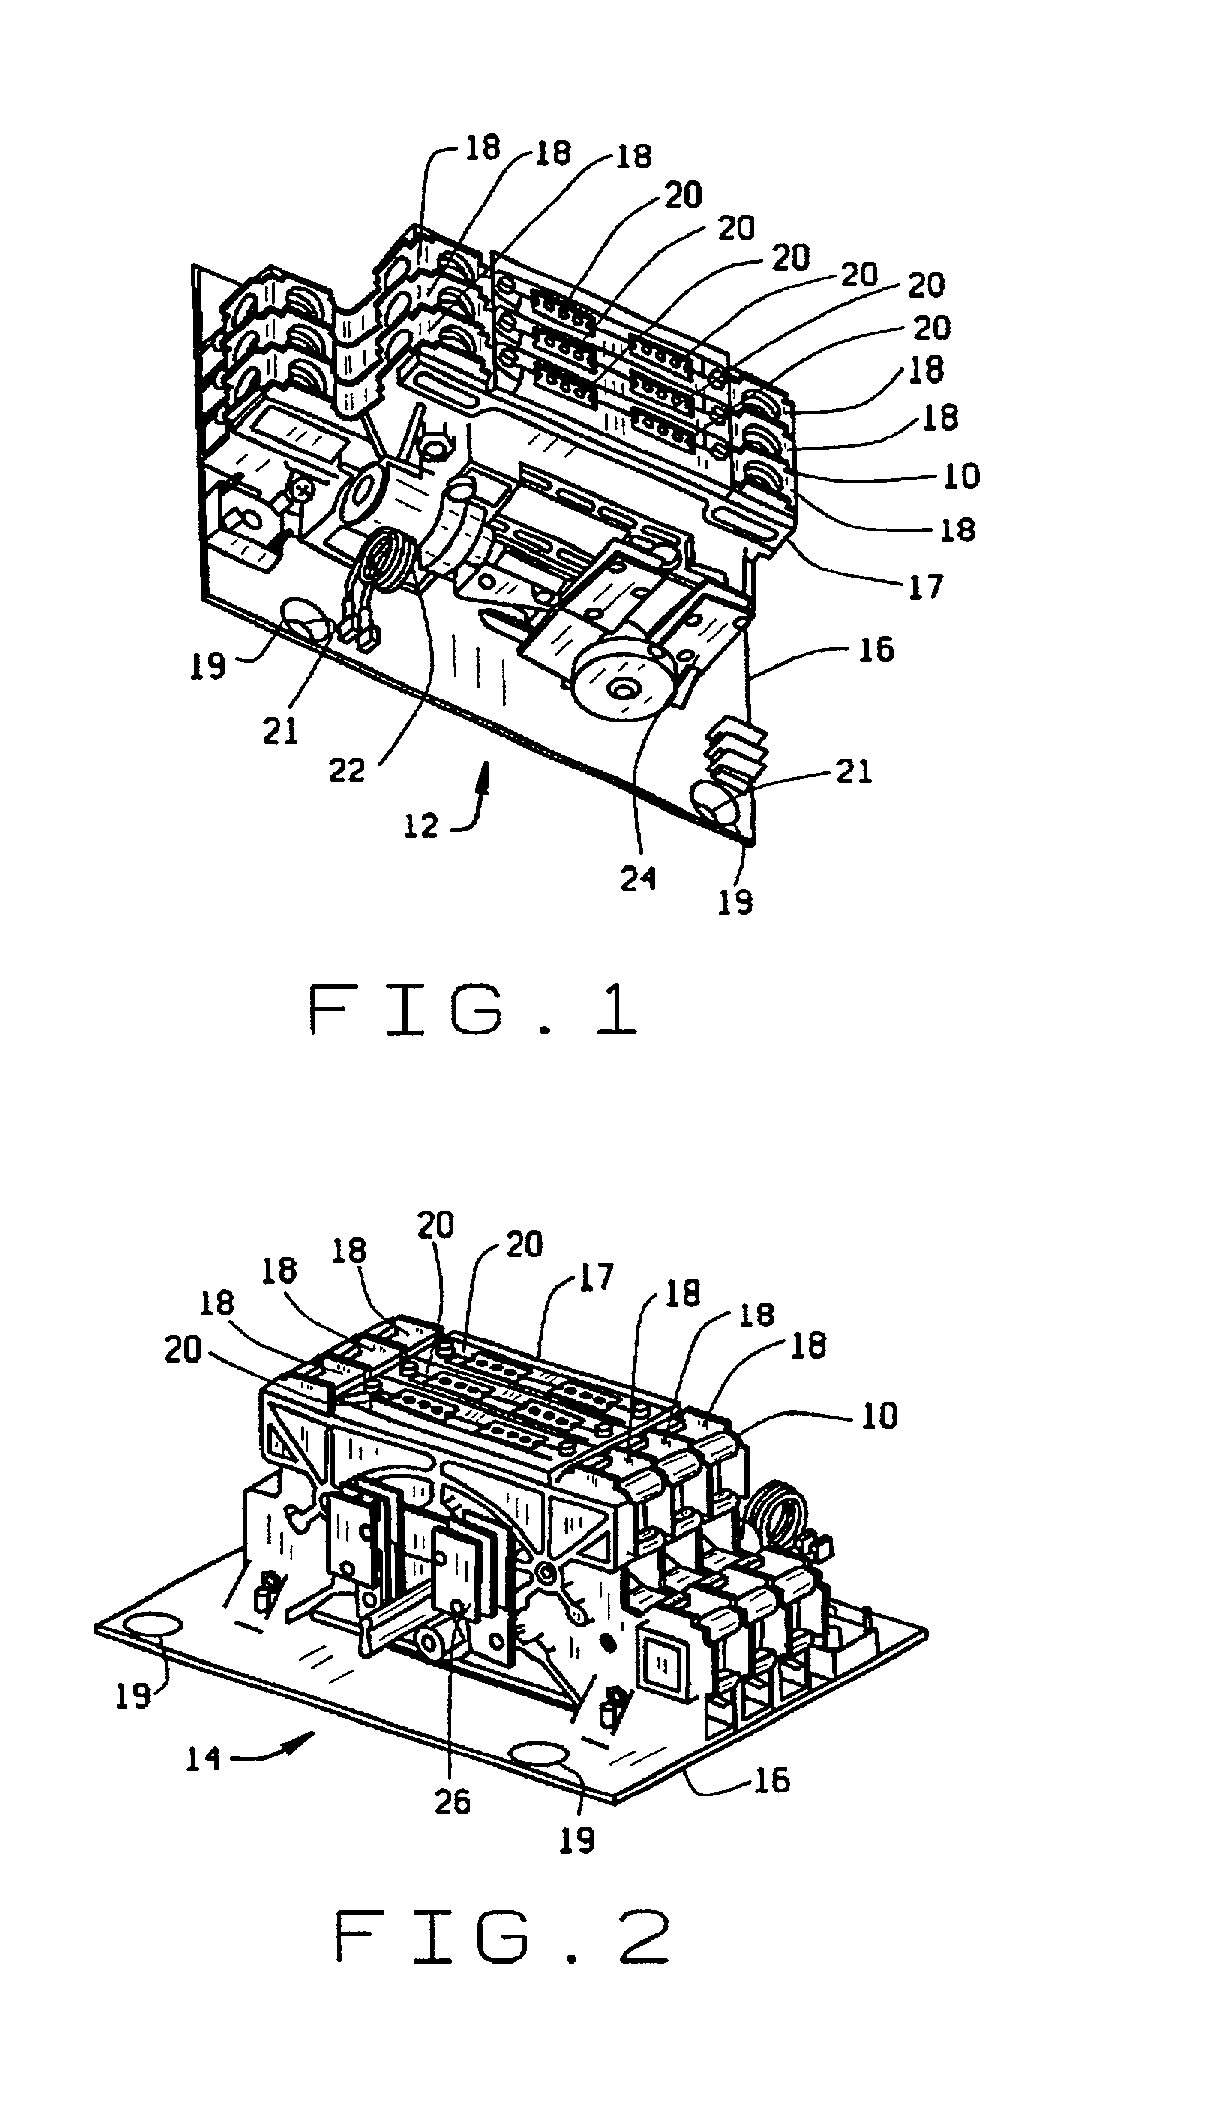 Methods and apparatus for automatically transferring electrical power